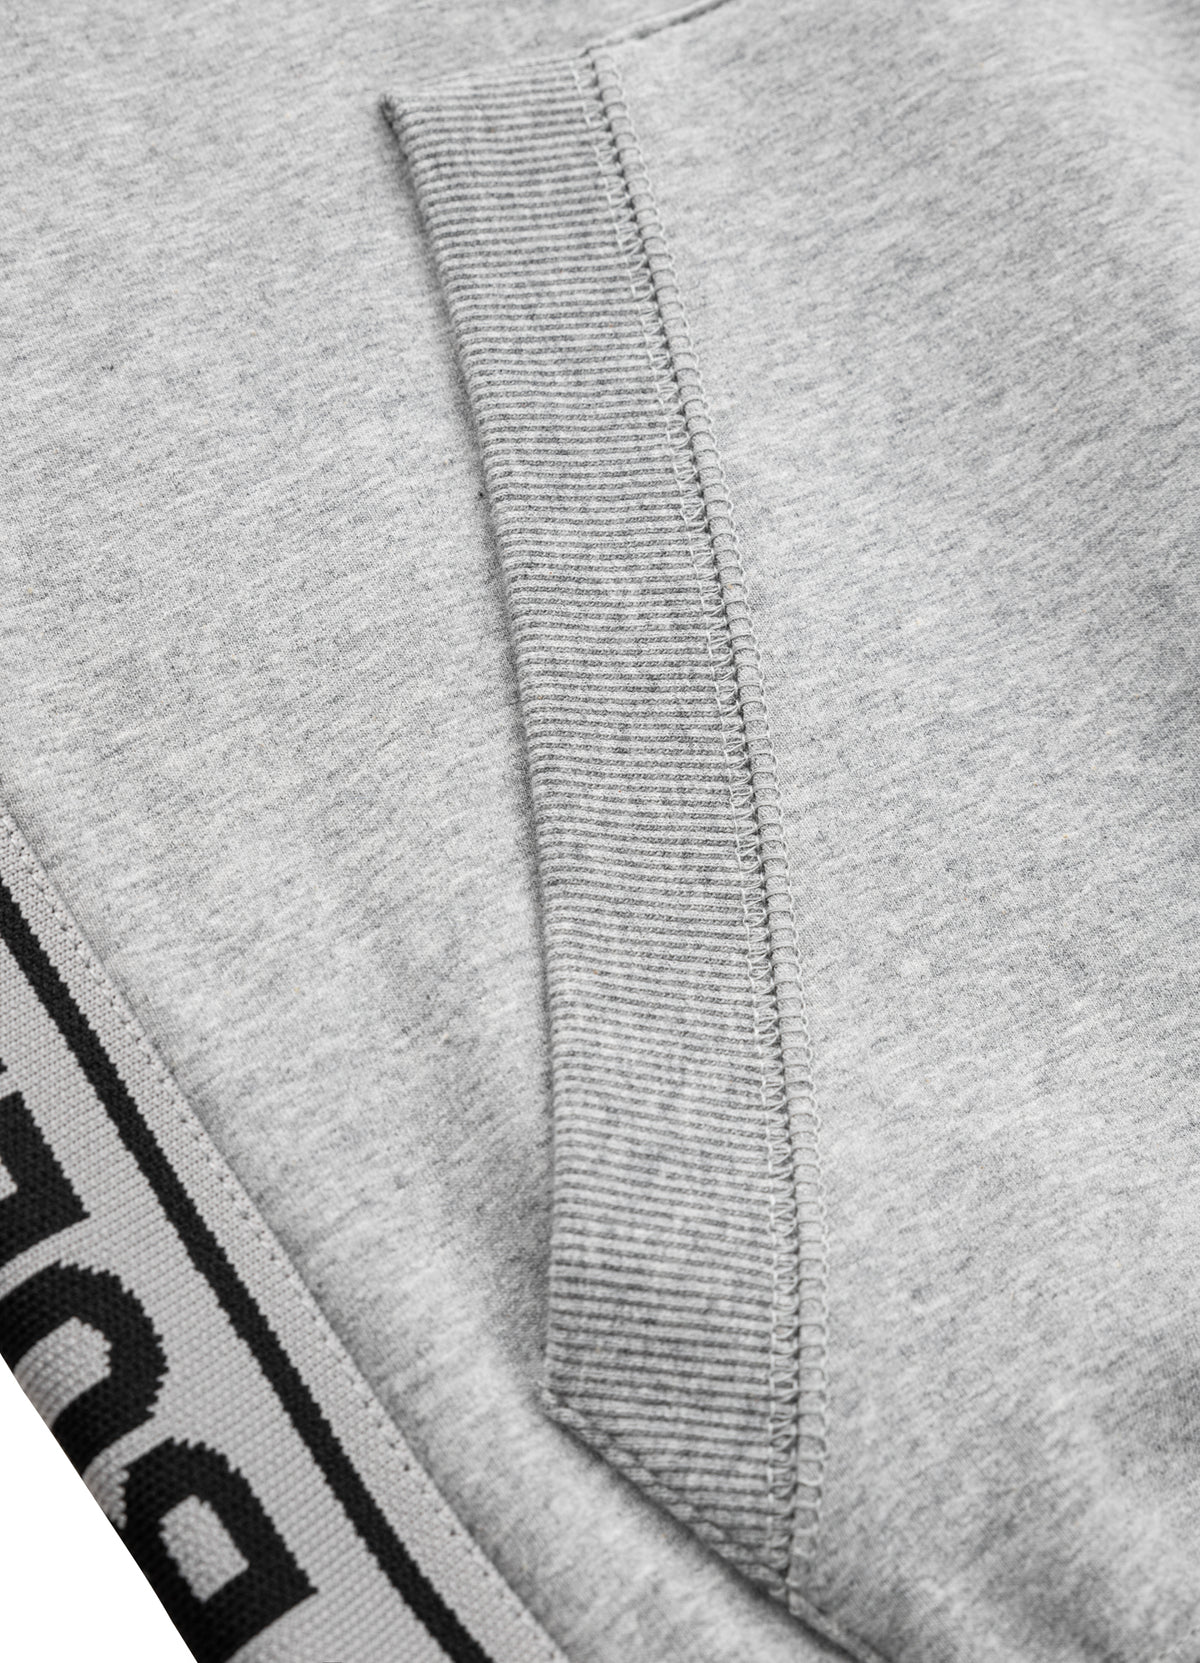 SMALL LOGO FRENCH TERRY 21 Grey Hooded Zip.